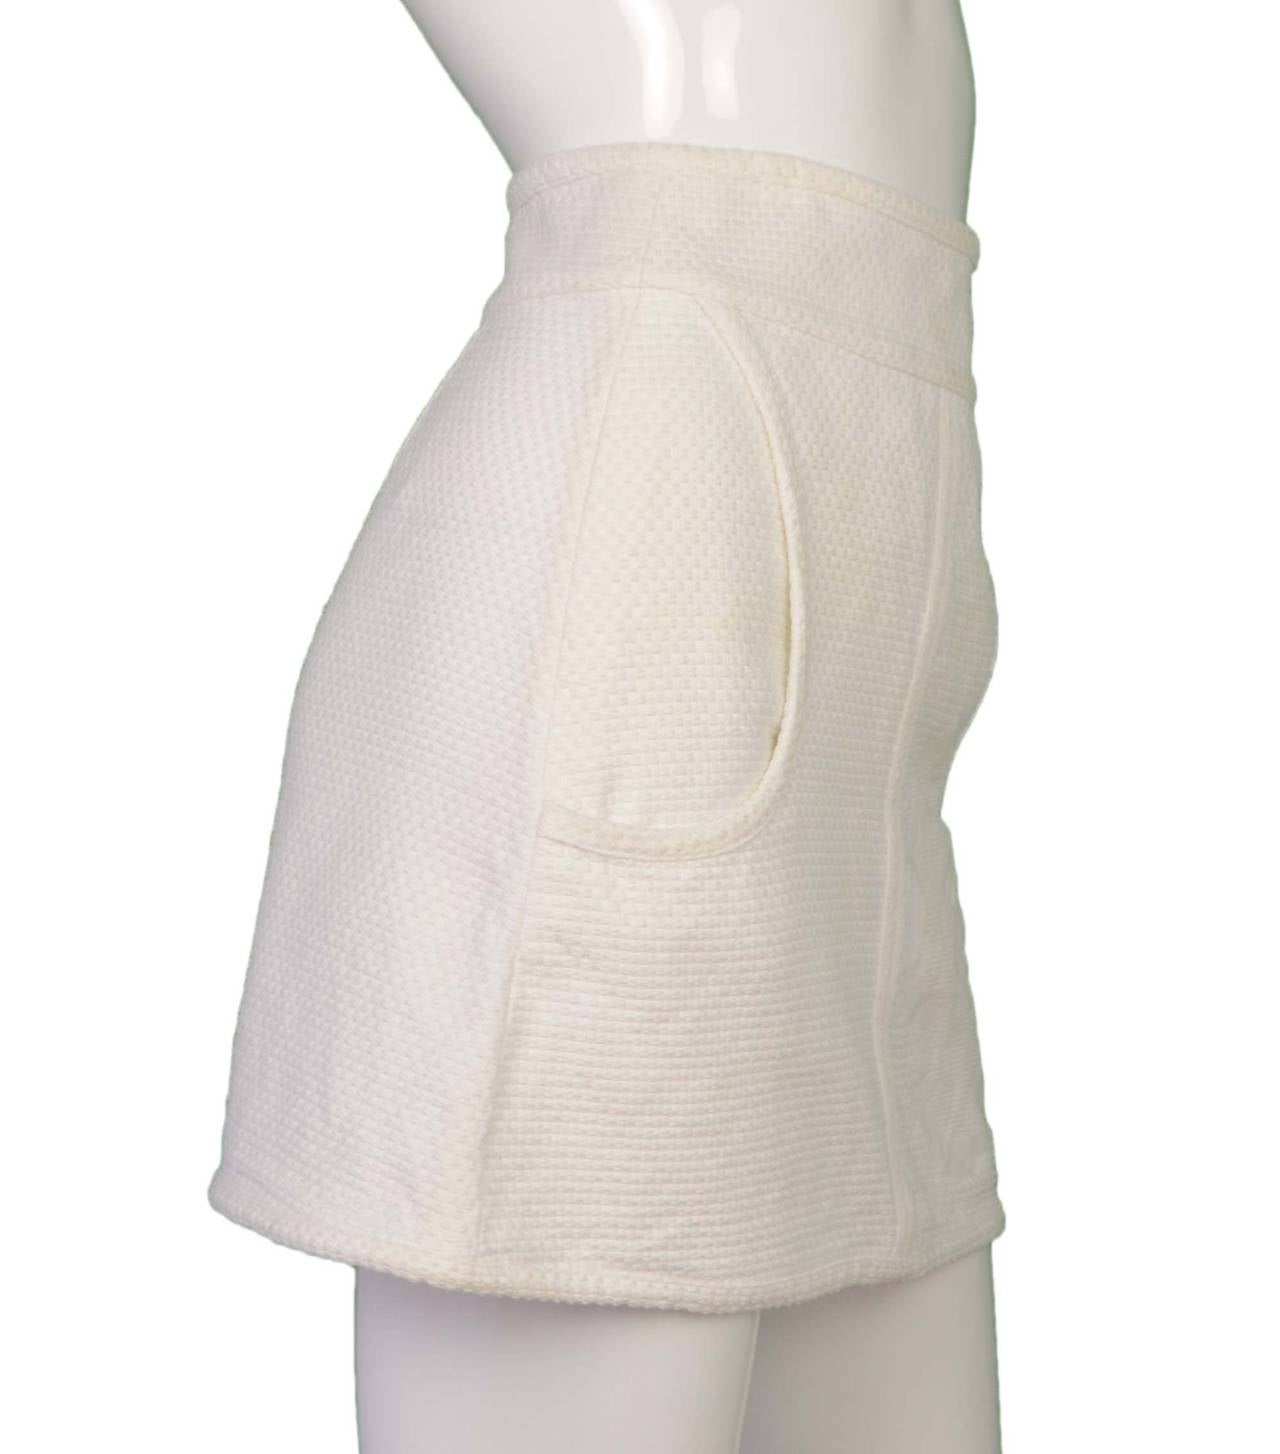 Chanel White Cotton Tennis Skirt 
Features large camelia flower with cc in center on left front panel of skirt
Made in: France
Year of Production: 2009
Color: White
Composition: 100% cotton
Lining: None
Closure/opening: Back center